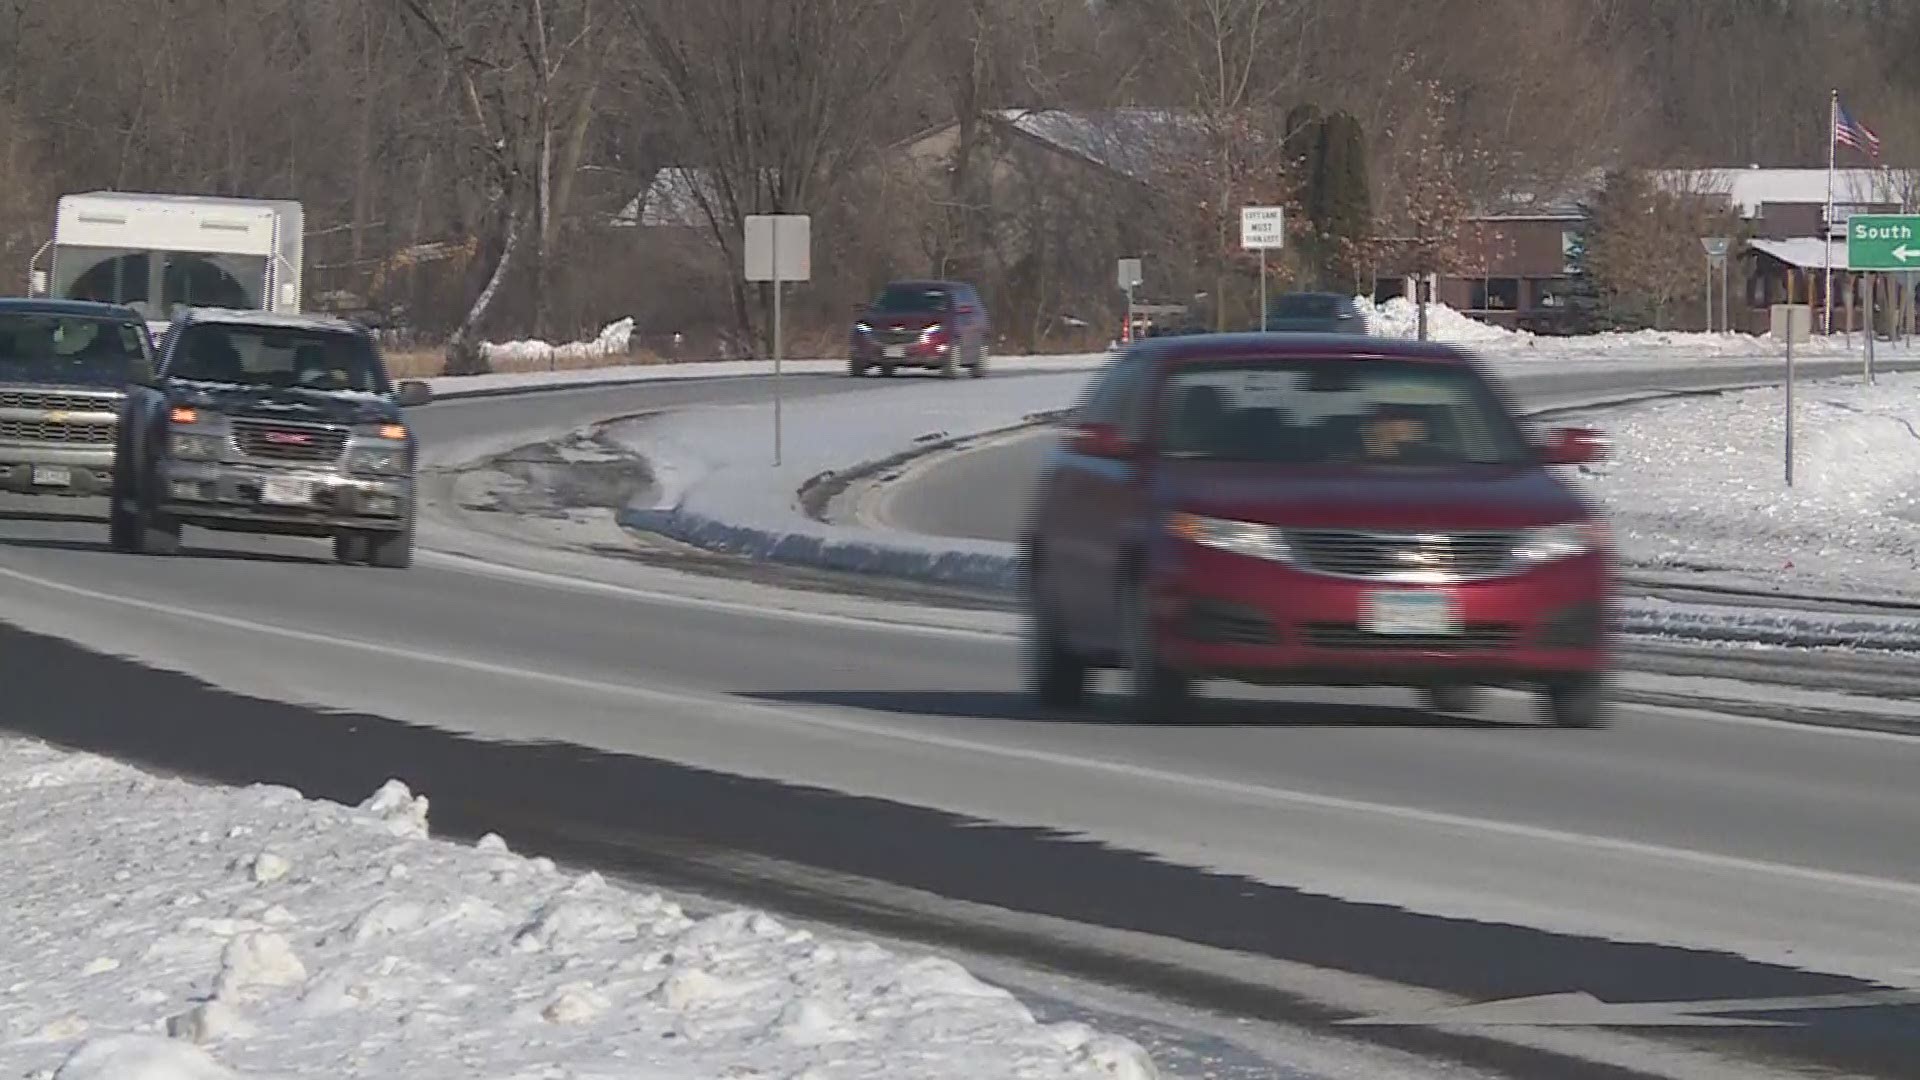 Highway 8 in Chisago County has been nicknamed "The Highway of Death" by locals. The public's being asked to weigh in on plans to widen it, and add frontage roads.